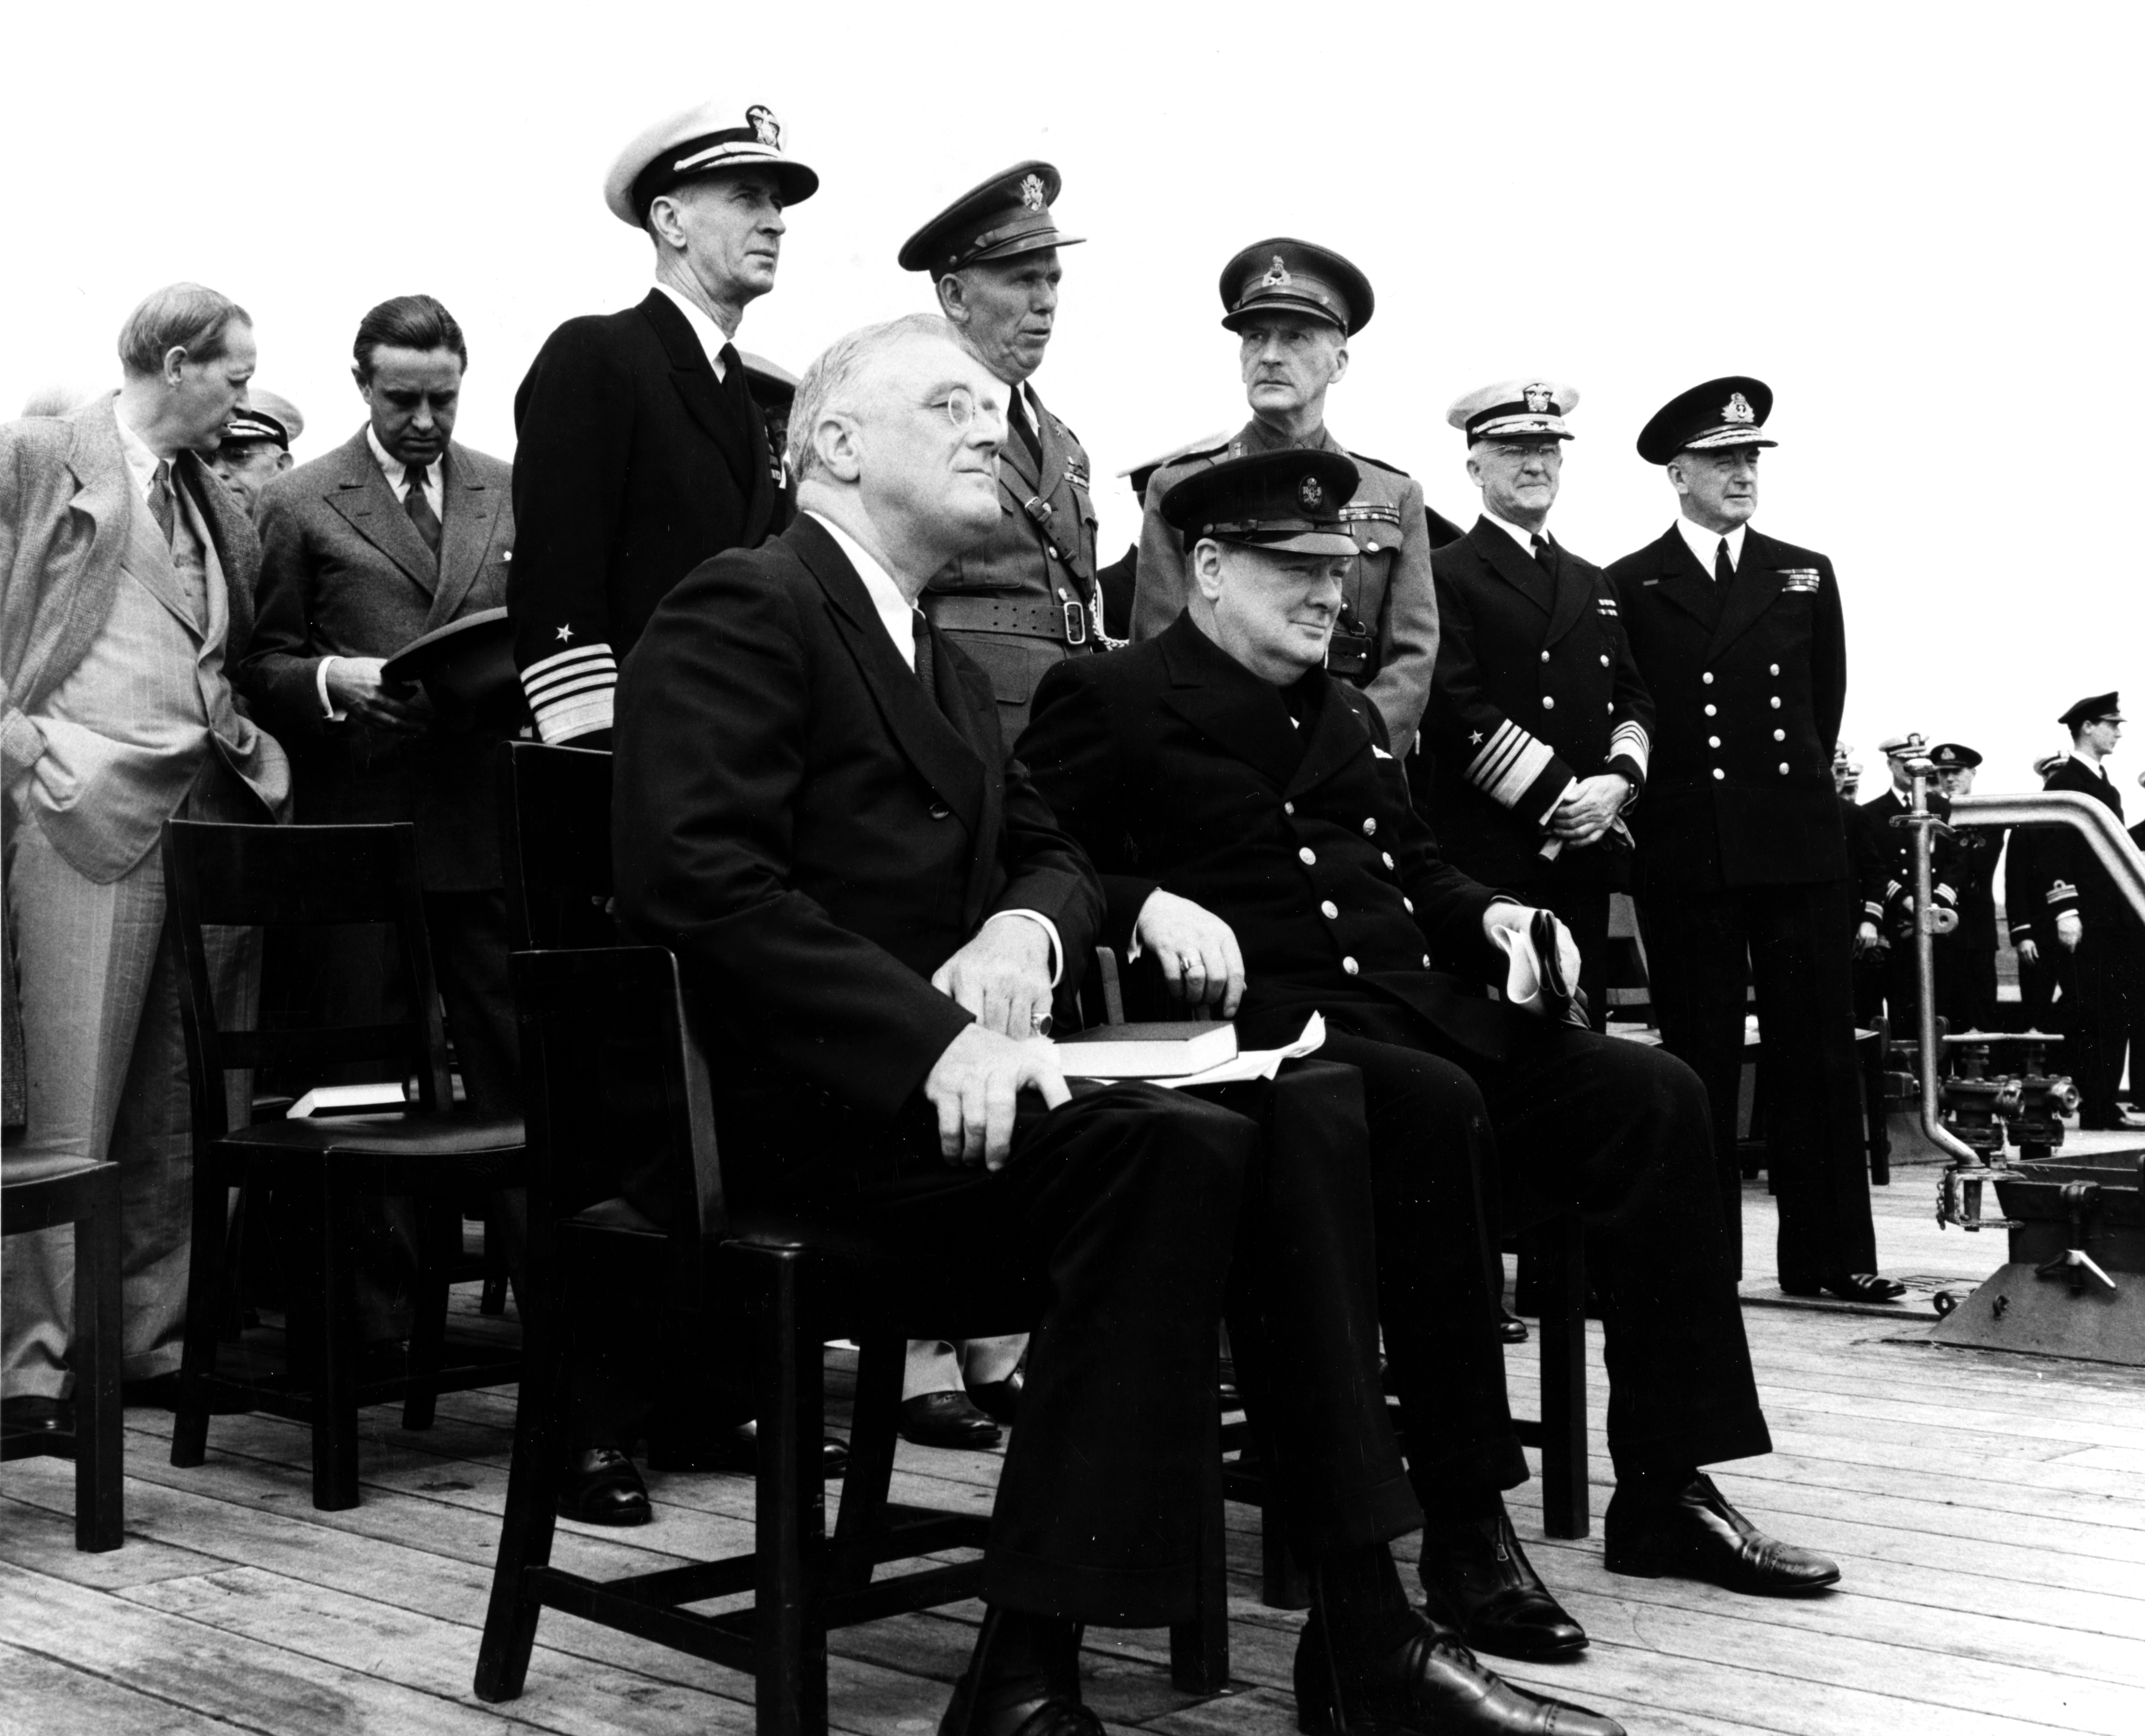 Roosevelt and Churchill at the Atlantic Charter Conference, Placentia Bay, Newfoundland, 10-12 Aug 1941, photo 1 of 2; Hopkins, Harriman, King, Marshall, Dill, Stark, and Pound behind them